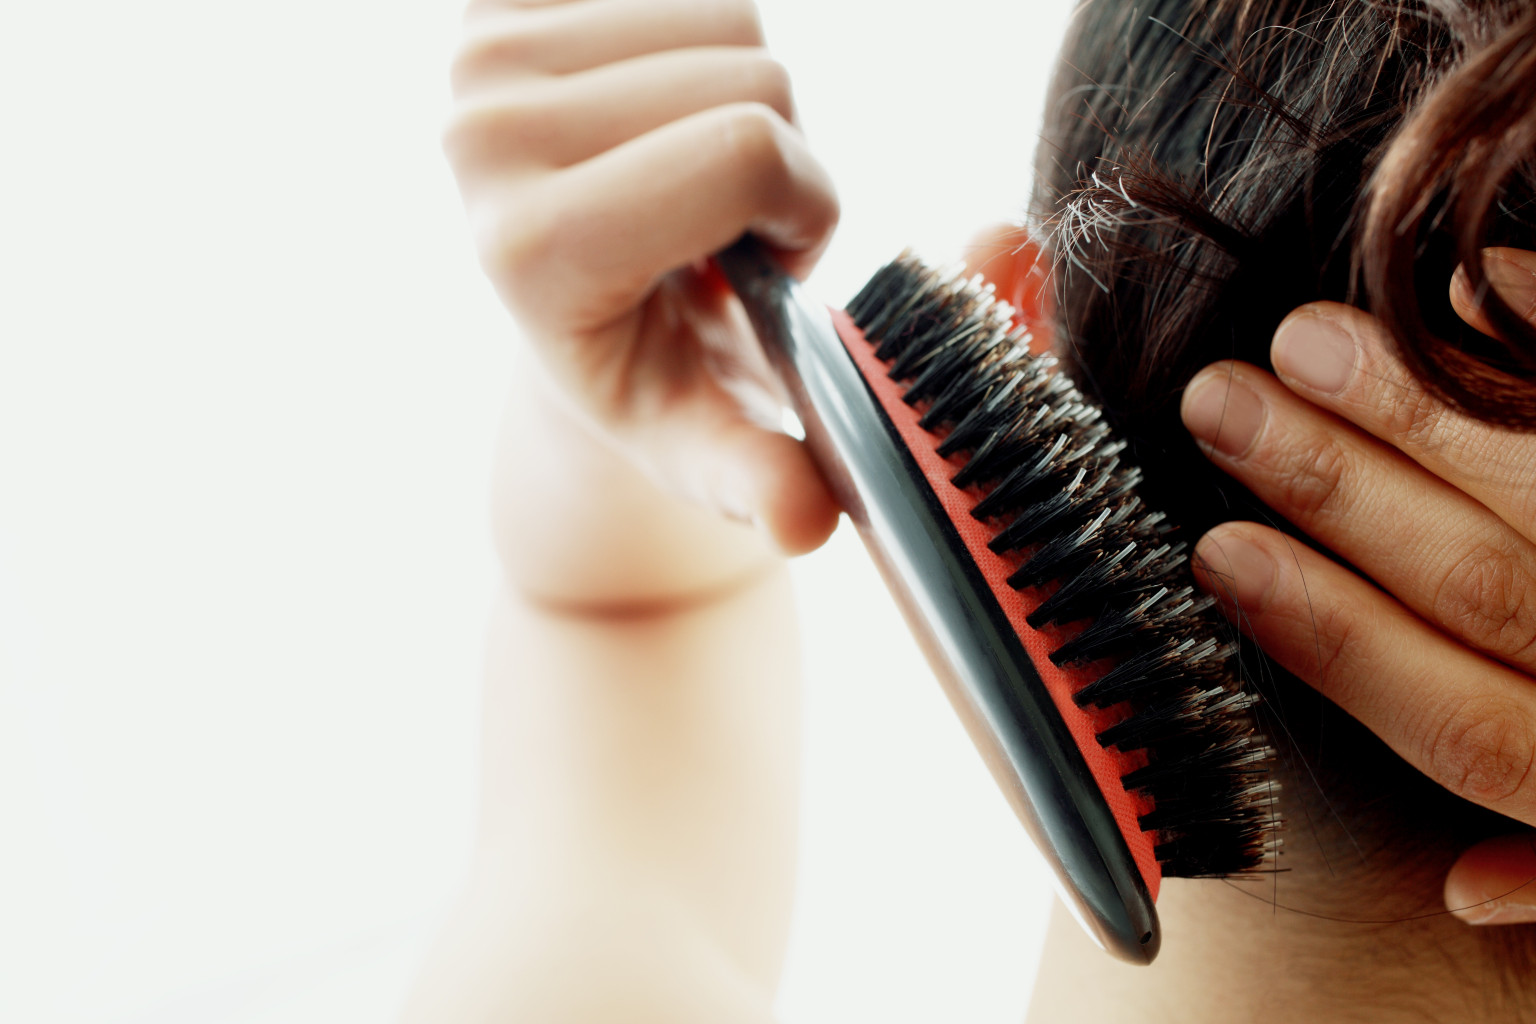 Hair Brushes Our Editors Trust To Smooth & Tease Their Strands (PHOTOS